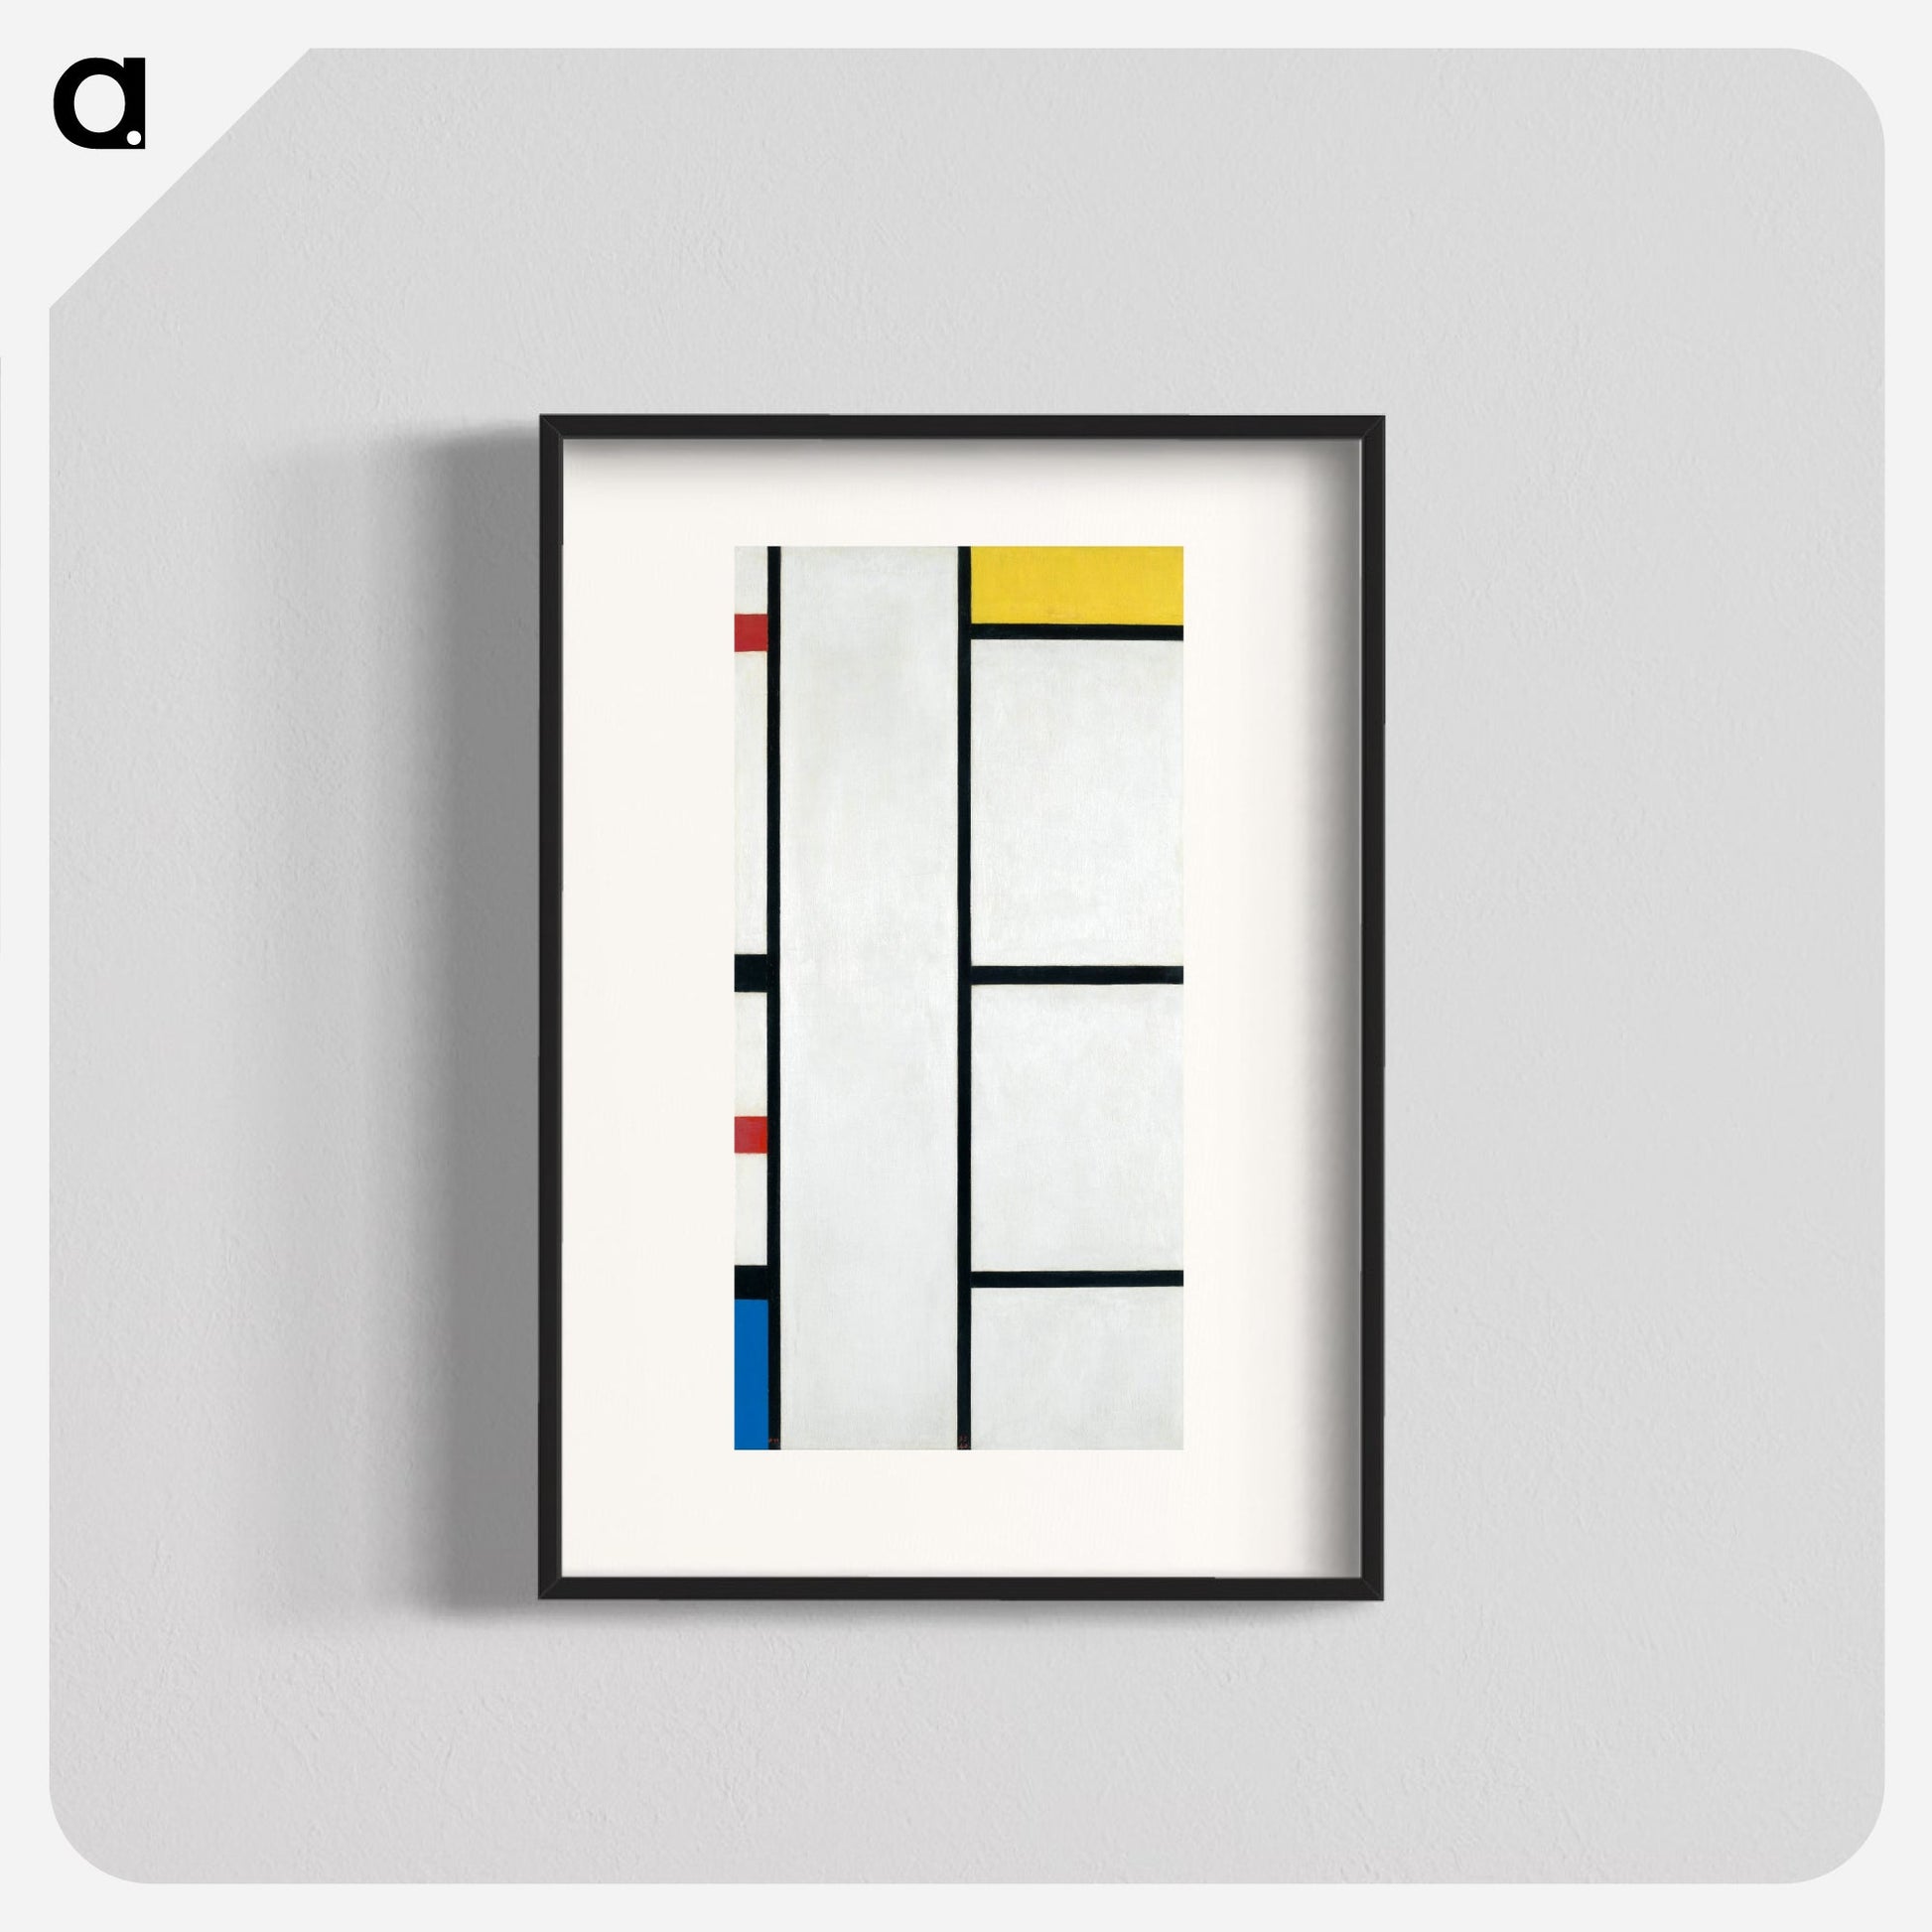 Composition with Red, Yellow, and Blue Poster. - artgraph.